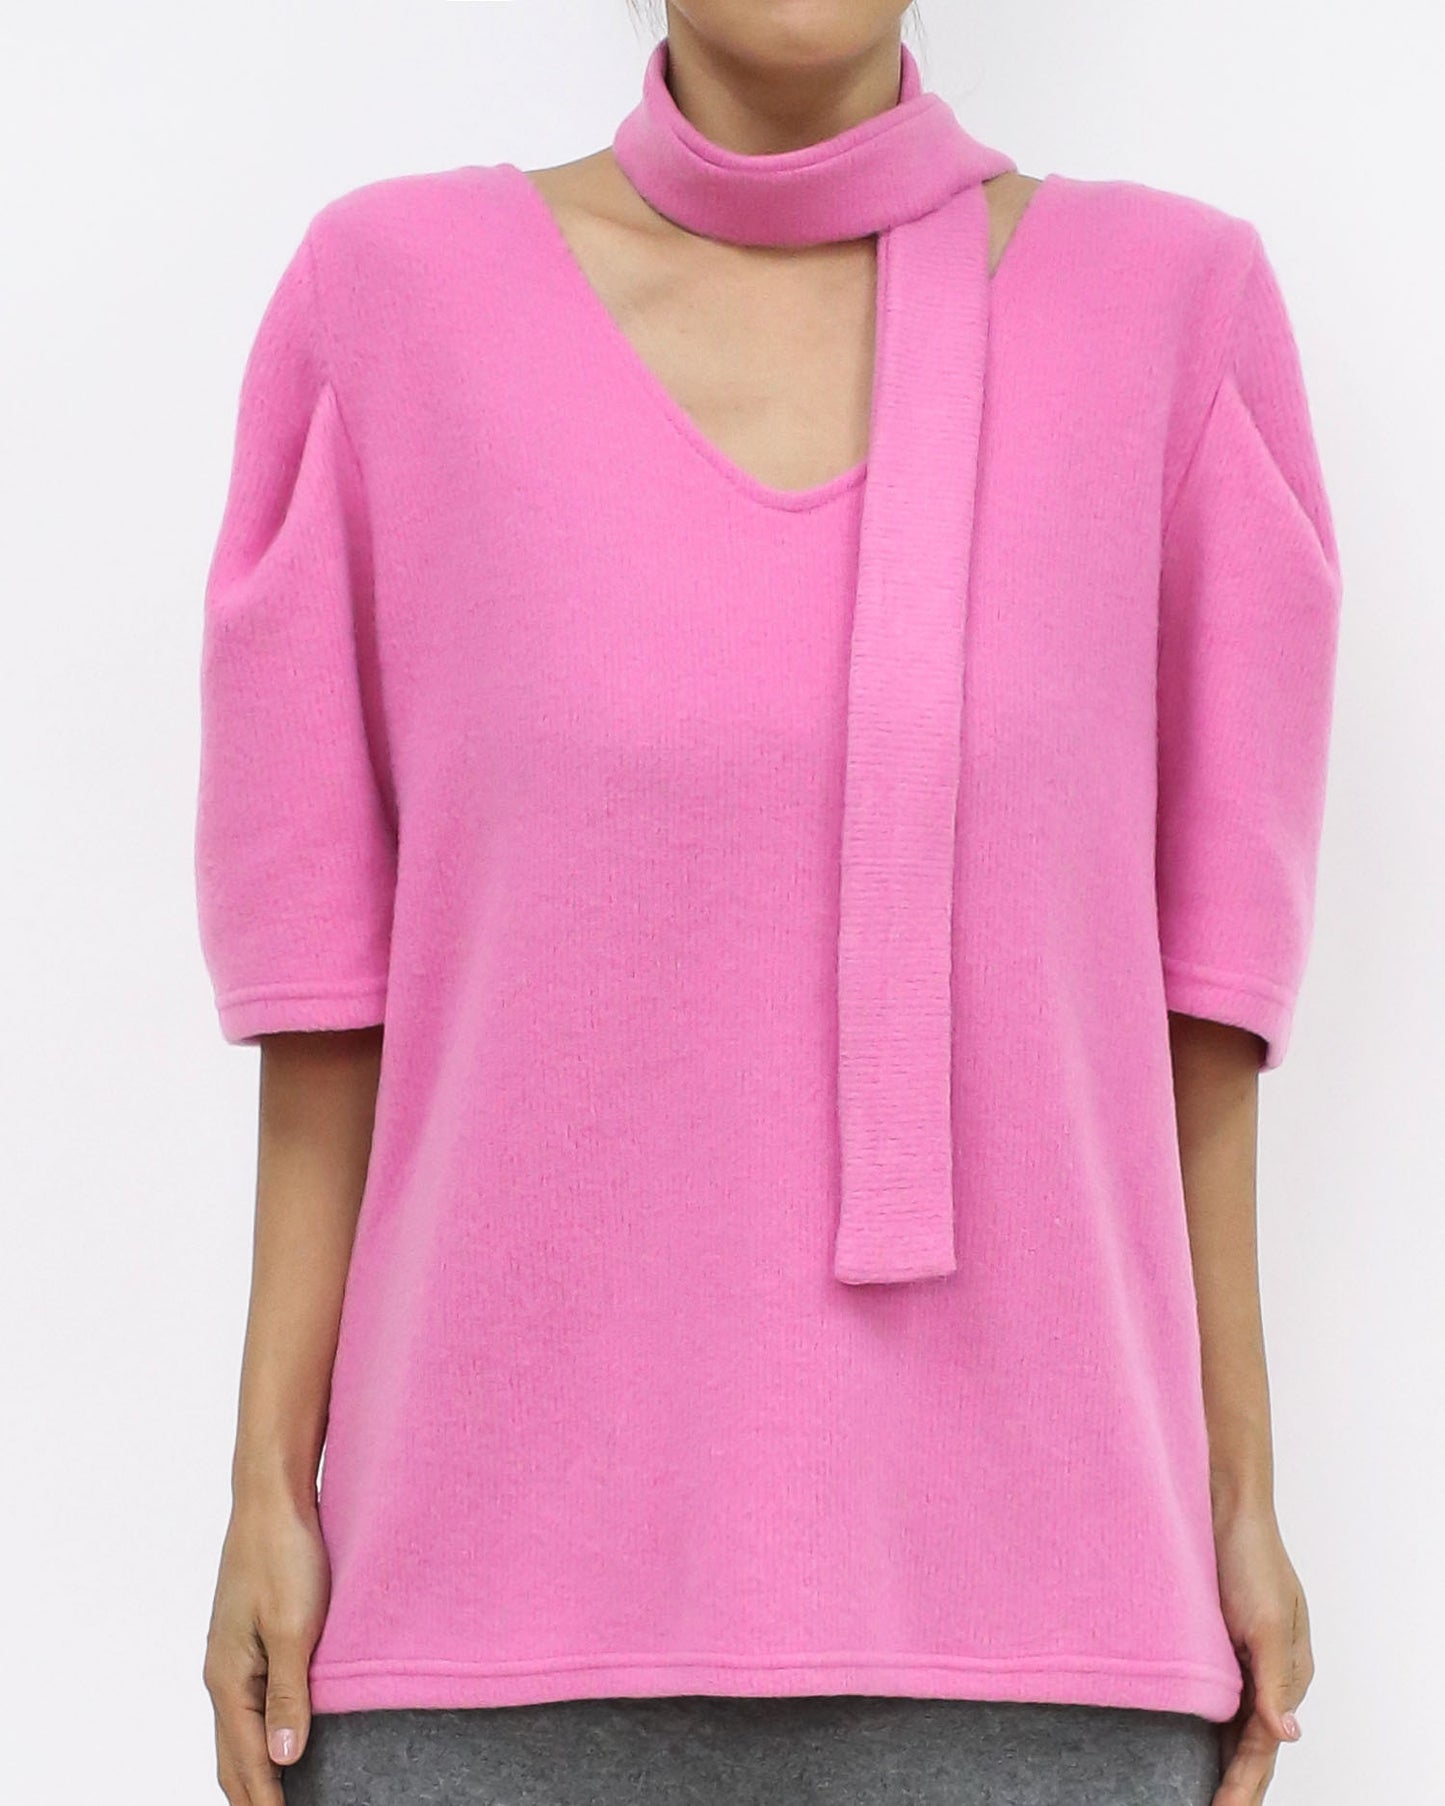 pink puff shoulder knitted top w/ wrap neck strap